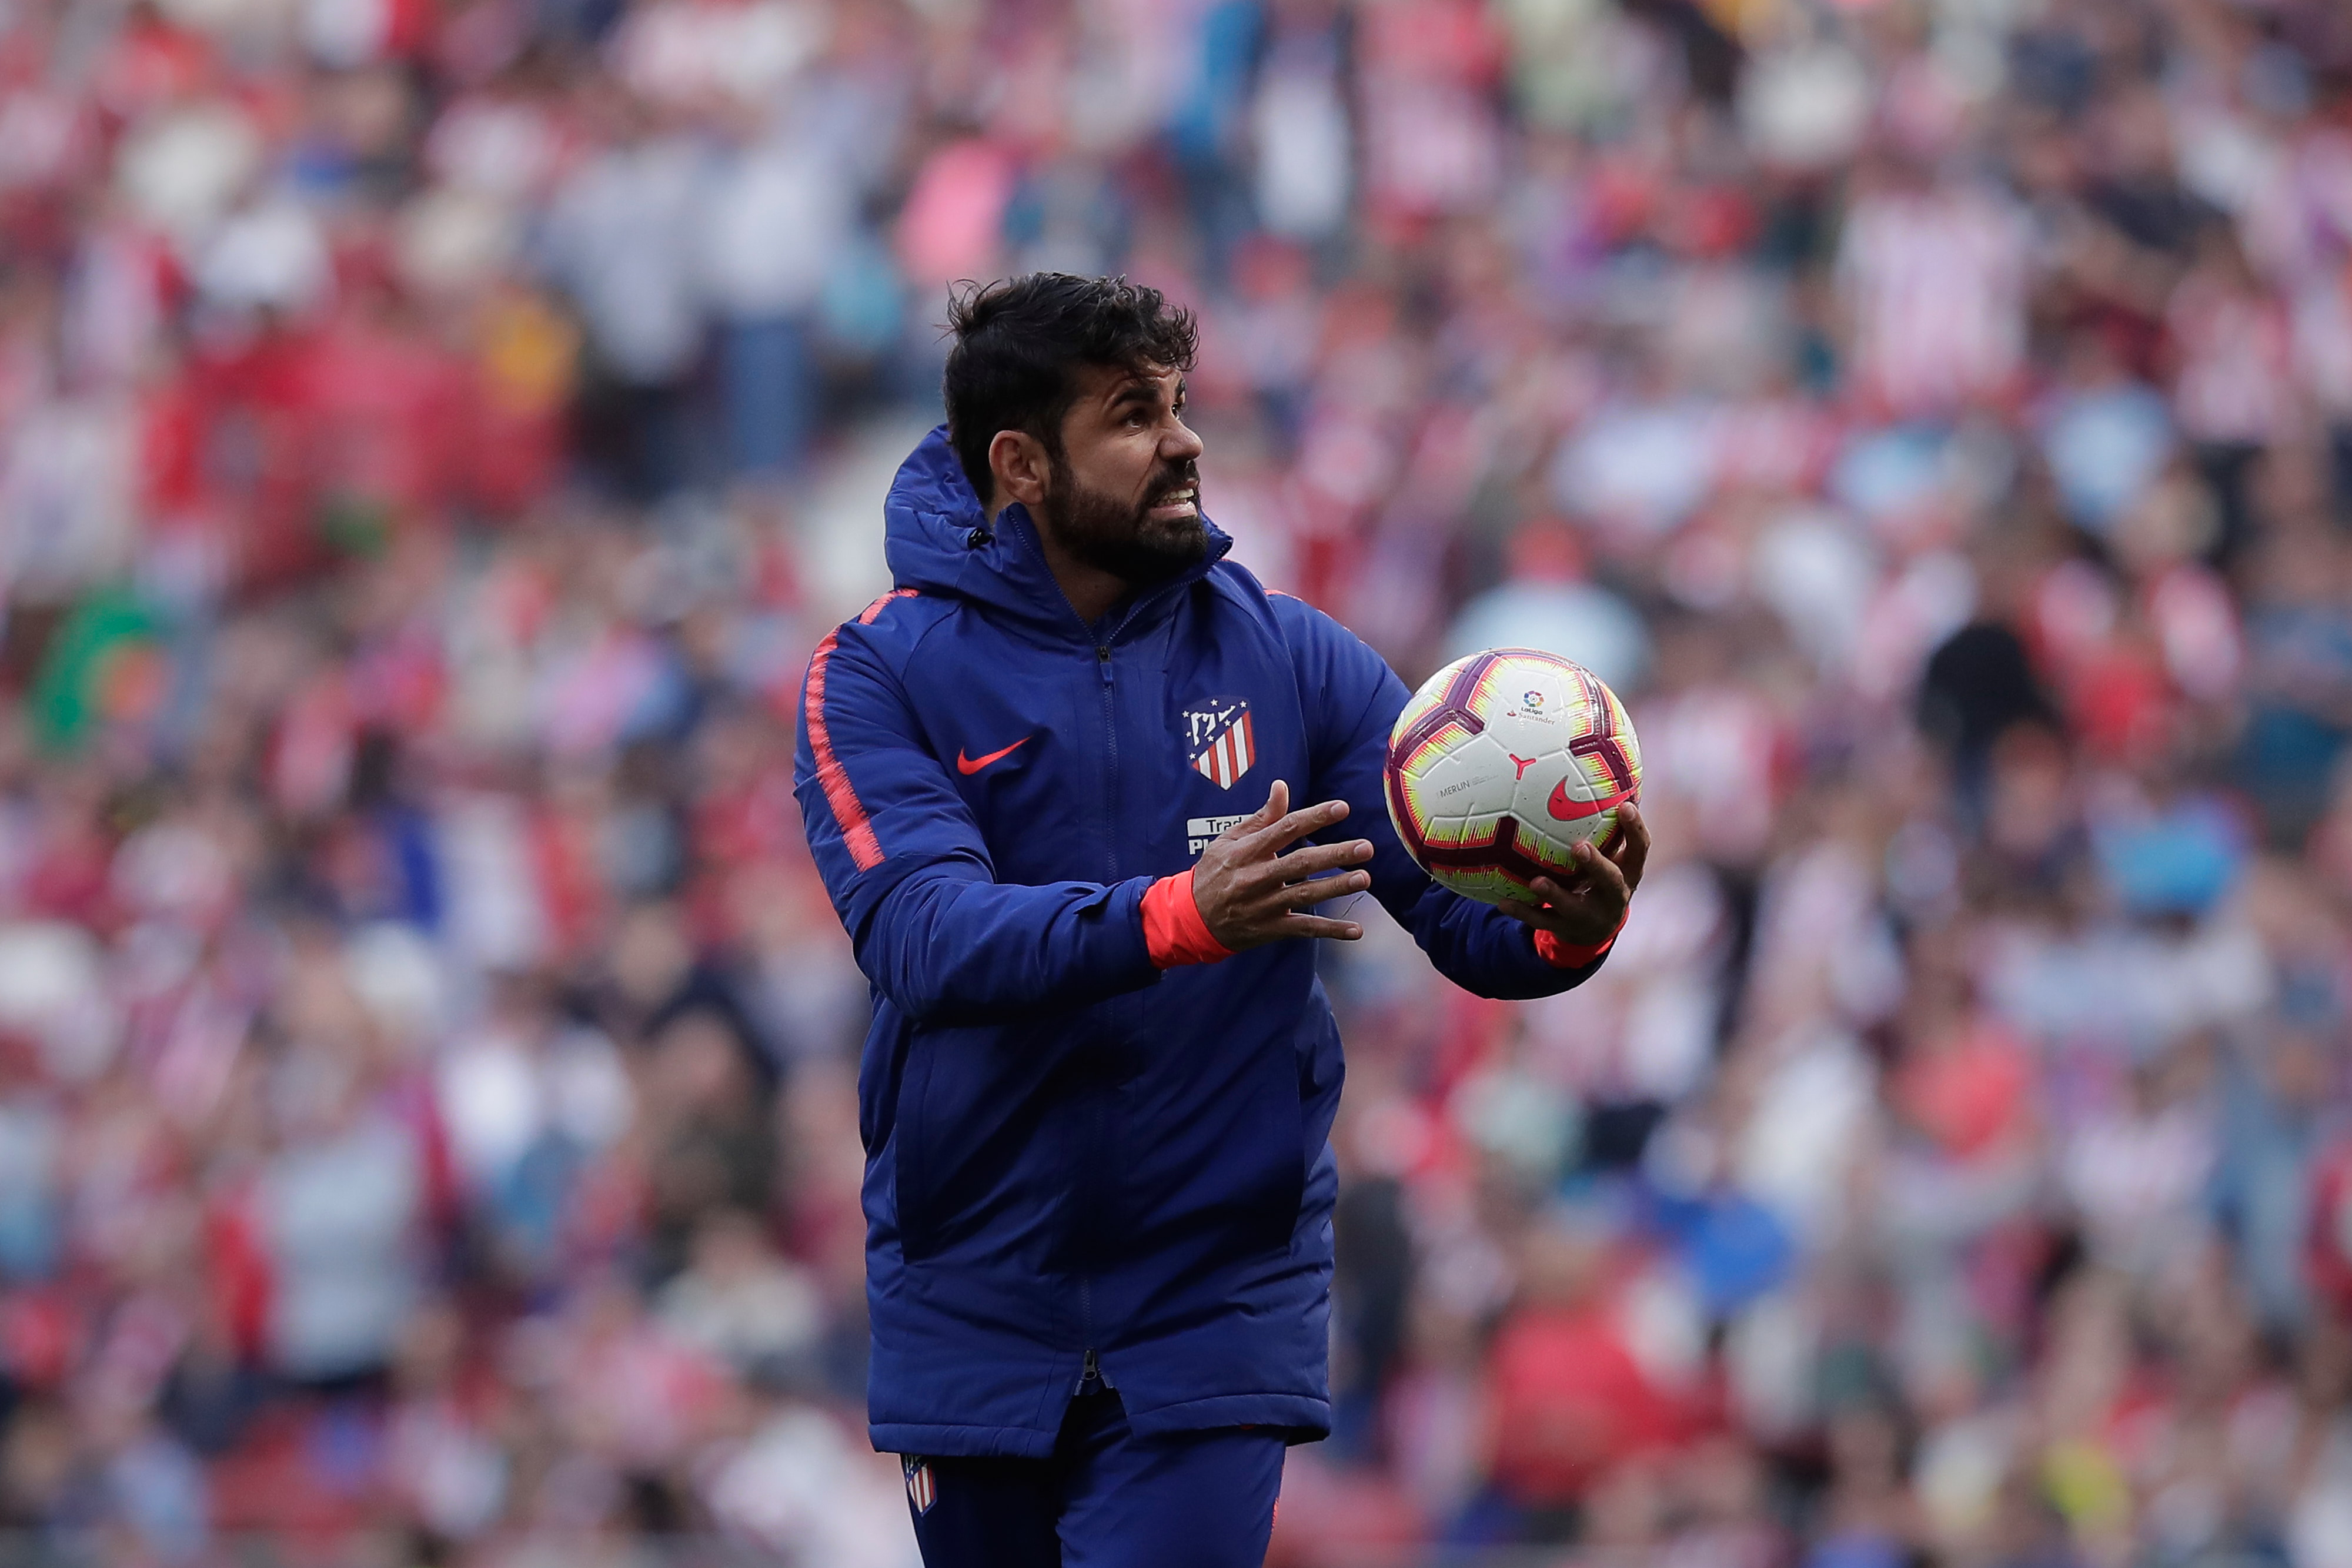 MADRID, SPAIN - FEBRUARY 24: Diego Costa of Atletico de Madrid reacts between halves during the La Liga match between  Club Atletico de Madrid and Villarreal CF at Wanda Metropolitano on February 24, 2019 in Madrid, Spain. (Photo by Gonzalo Arroyo Moreno/Getty Images)